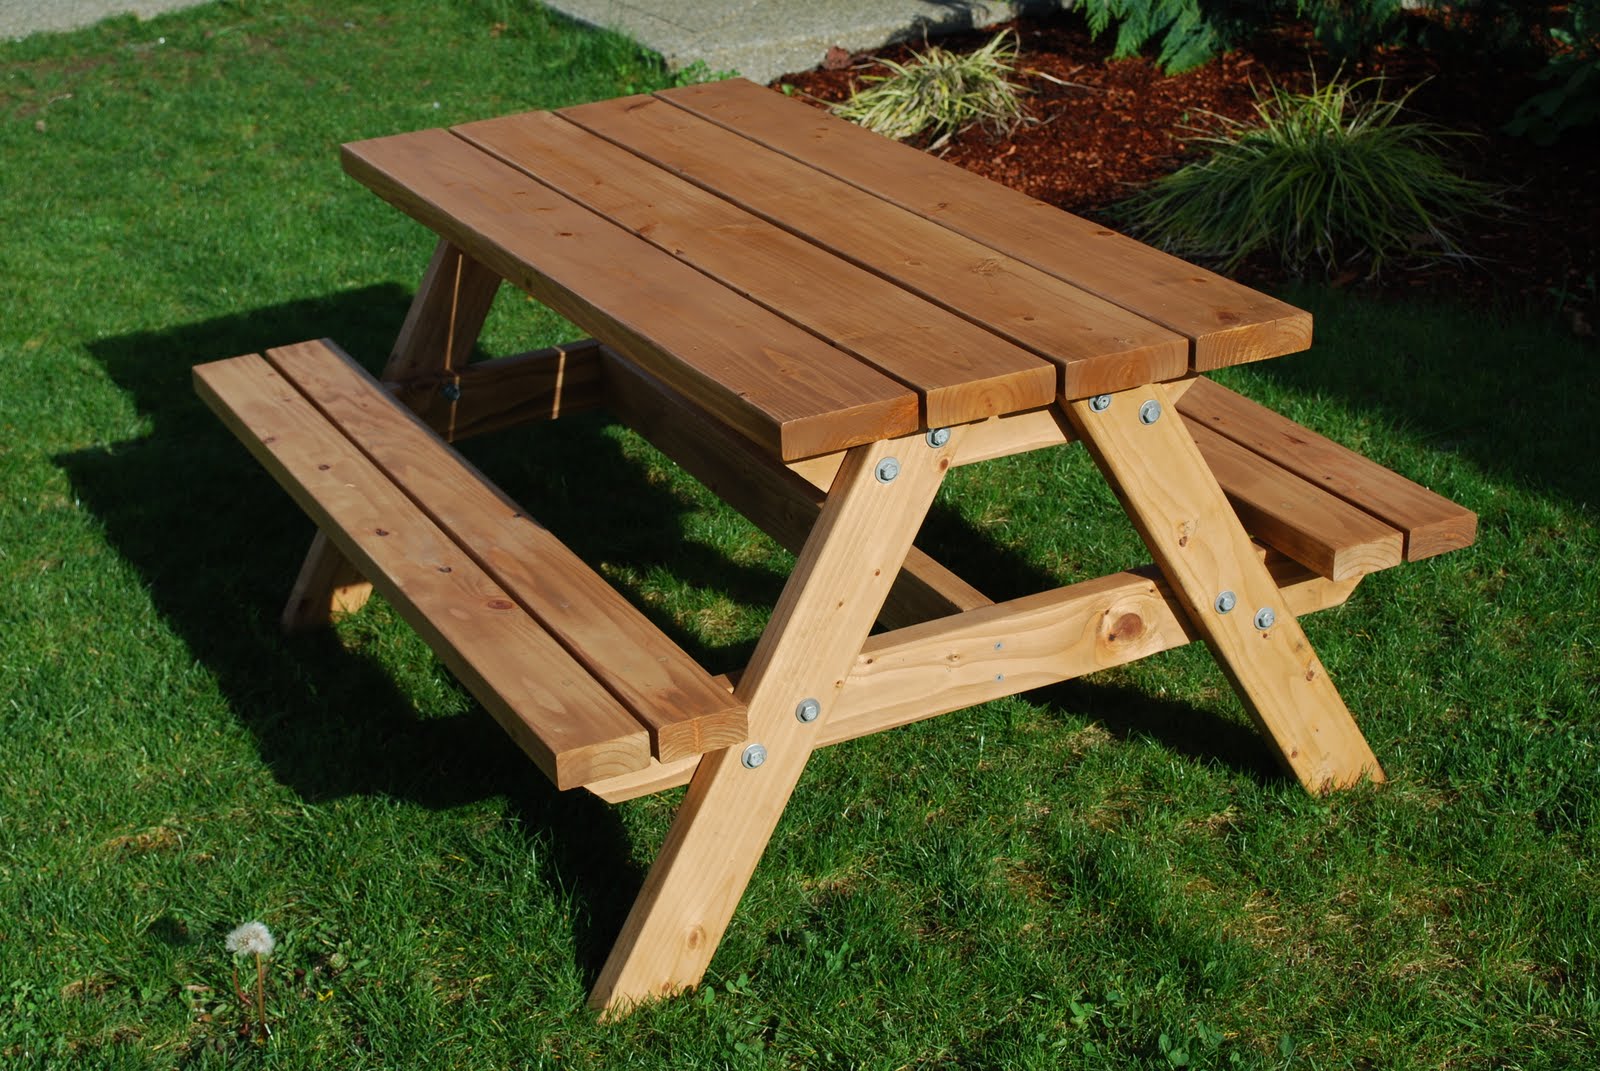 Wooden Picnic Tables The bigger kids picnic table